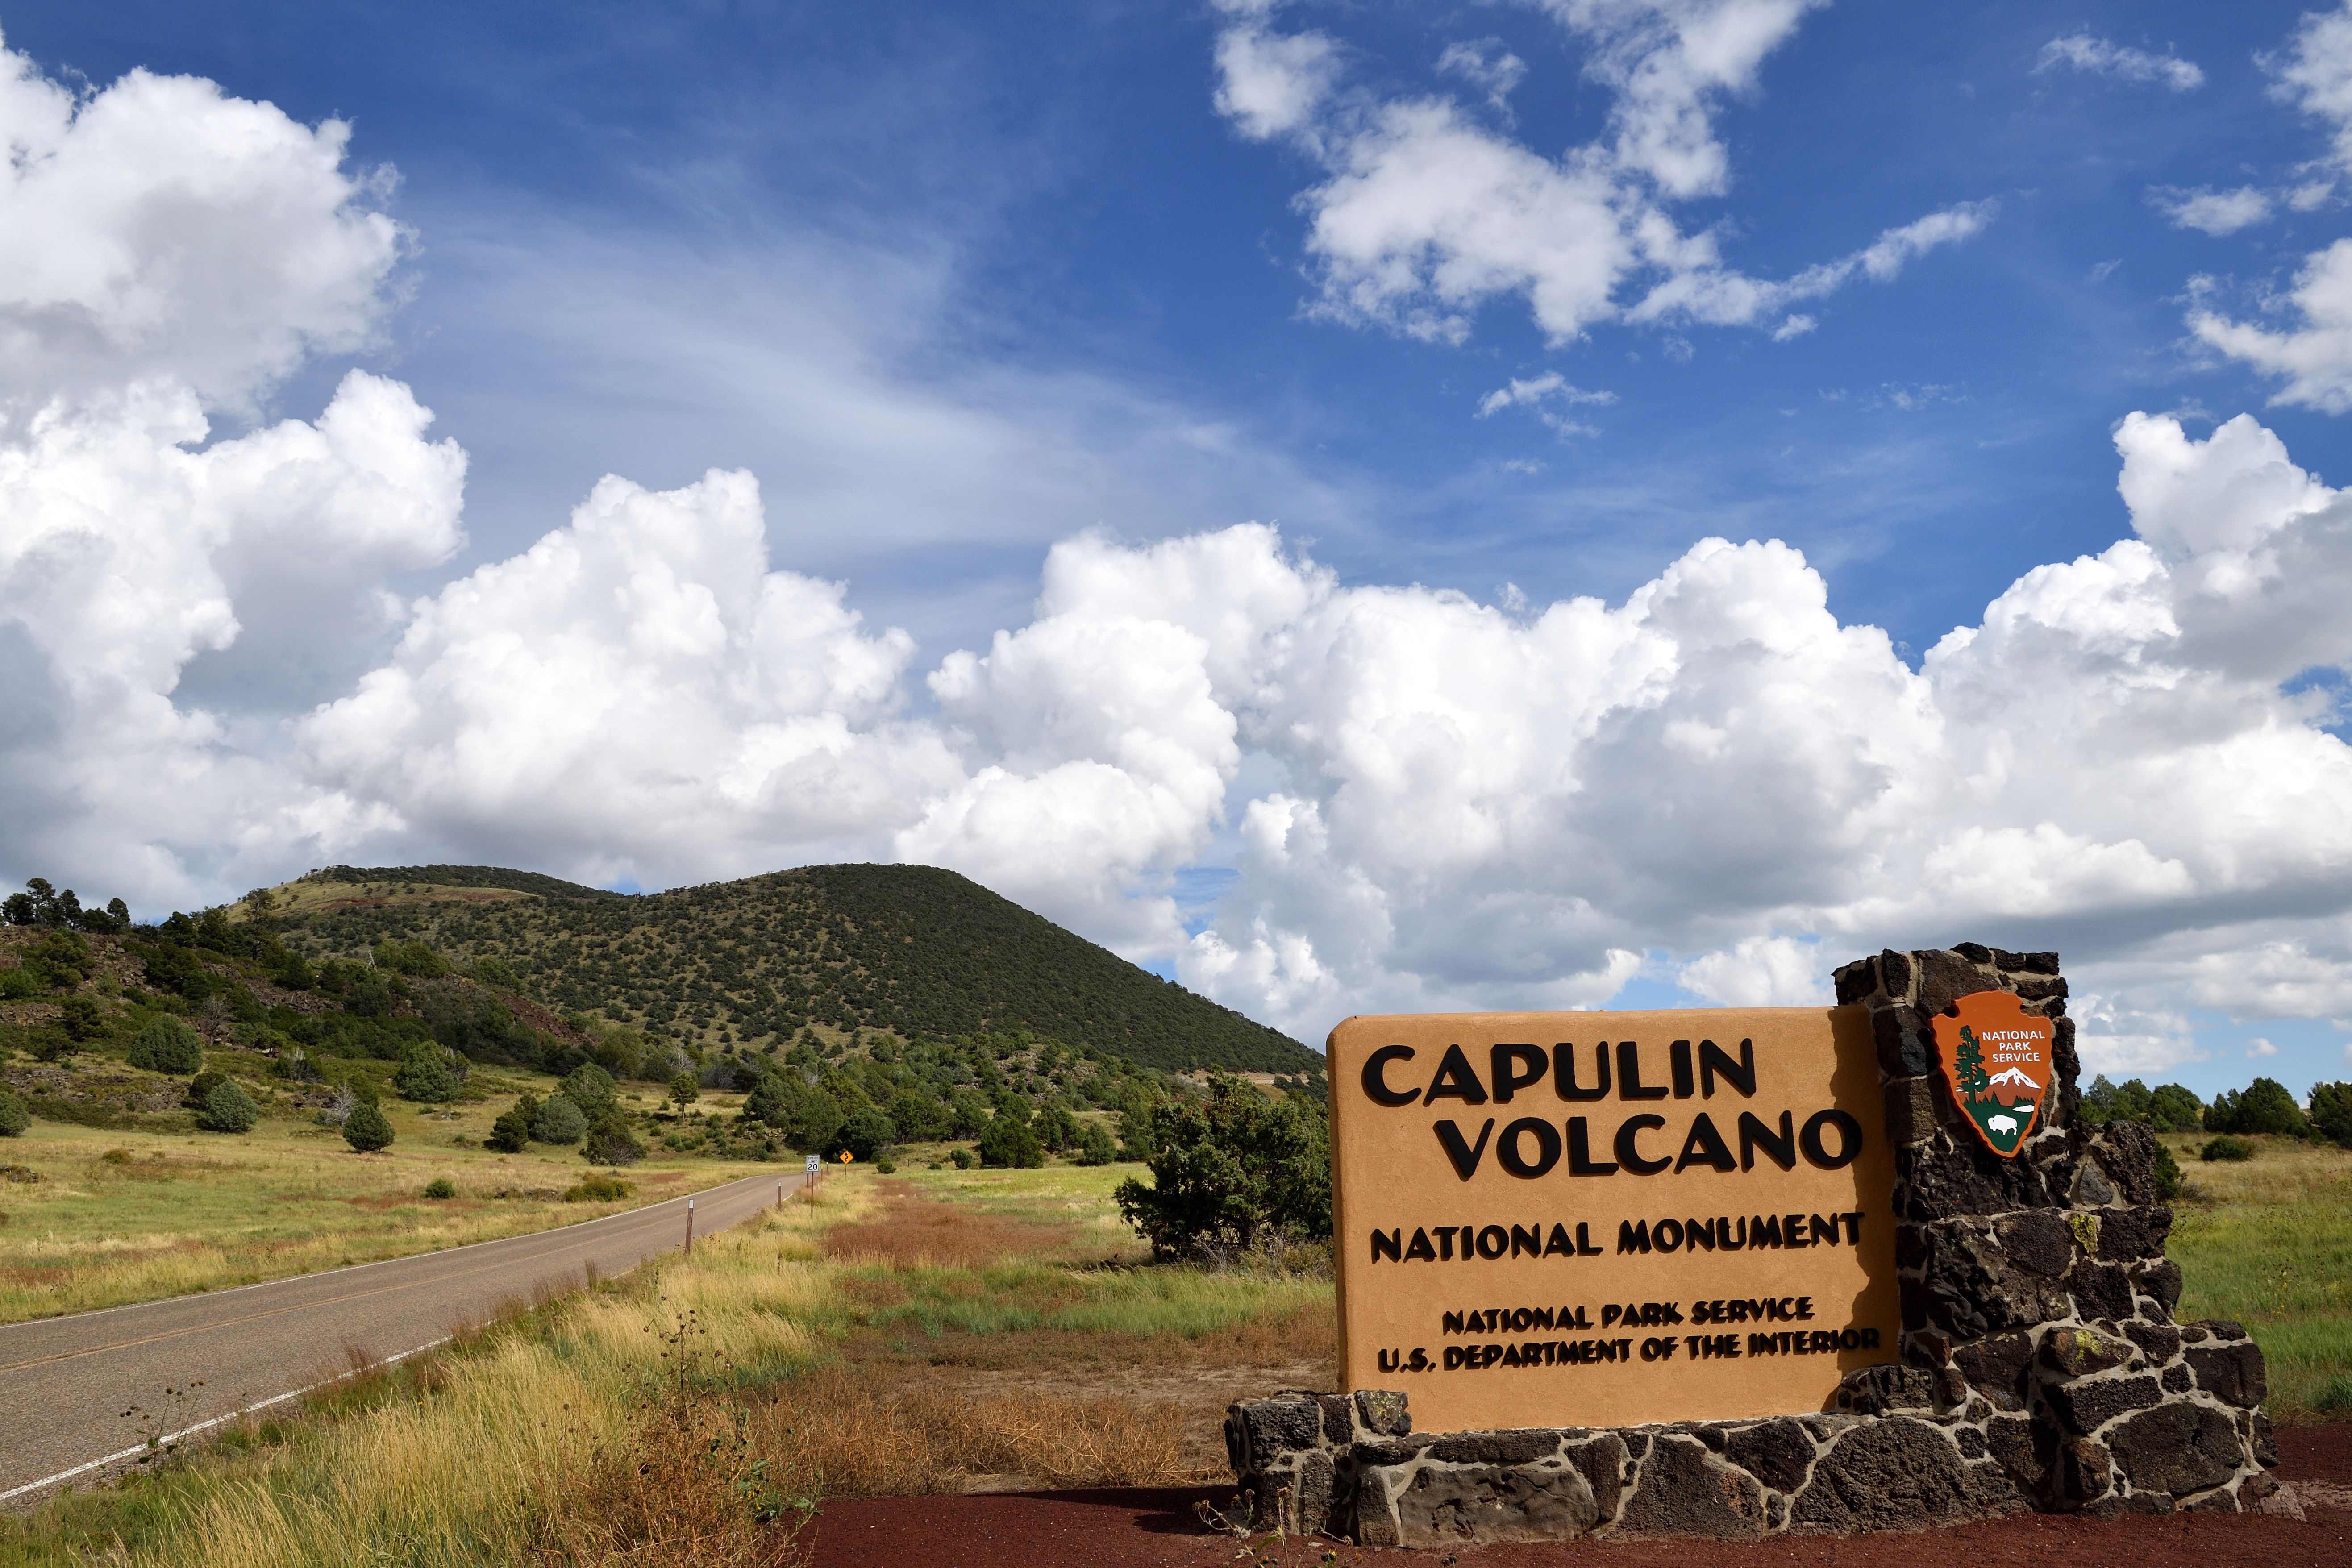 An entrance sign reading "Capulin Volcano National Monument, National Park Service, U.S. Department of the Interior" is constructed of rough lava rock.  In the distance the volcano is dotted with trees and defines the horizon